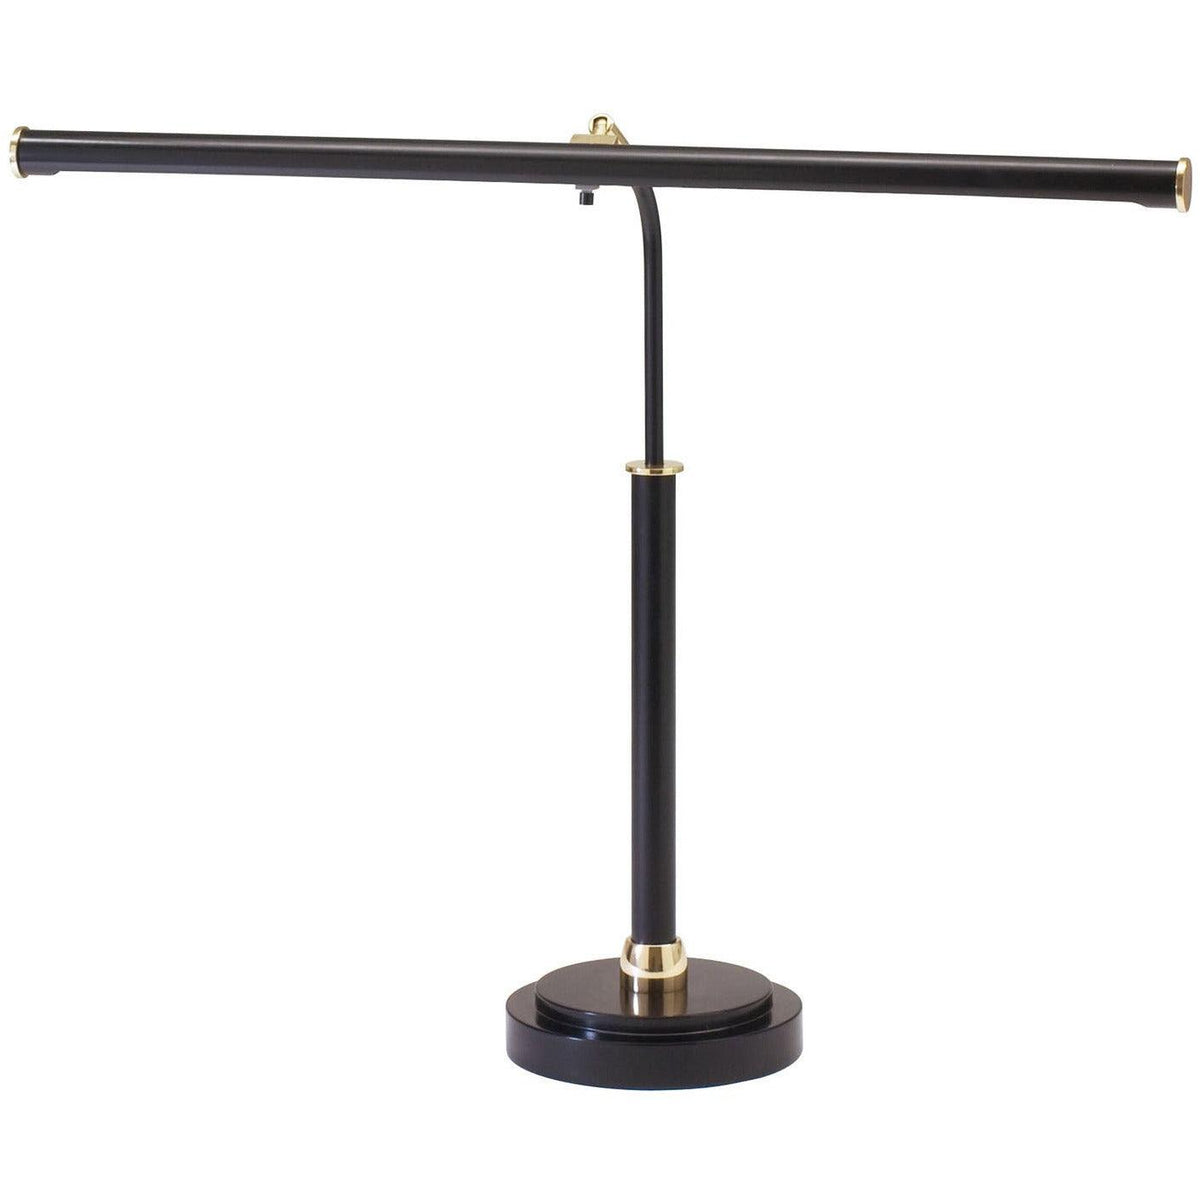 House of Troy - Piano Desk 19-Inch LED Piano Lamp - PLED100-617 | Montreal Lighting & Hardware